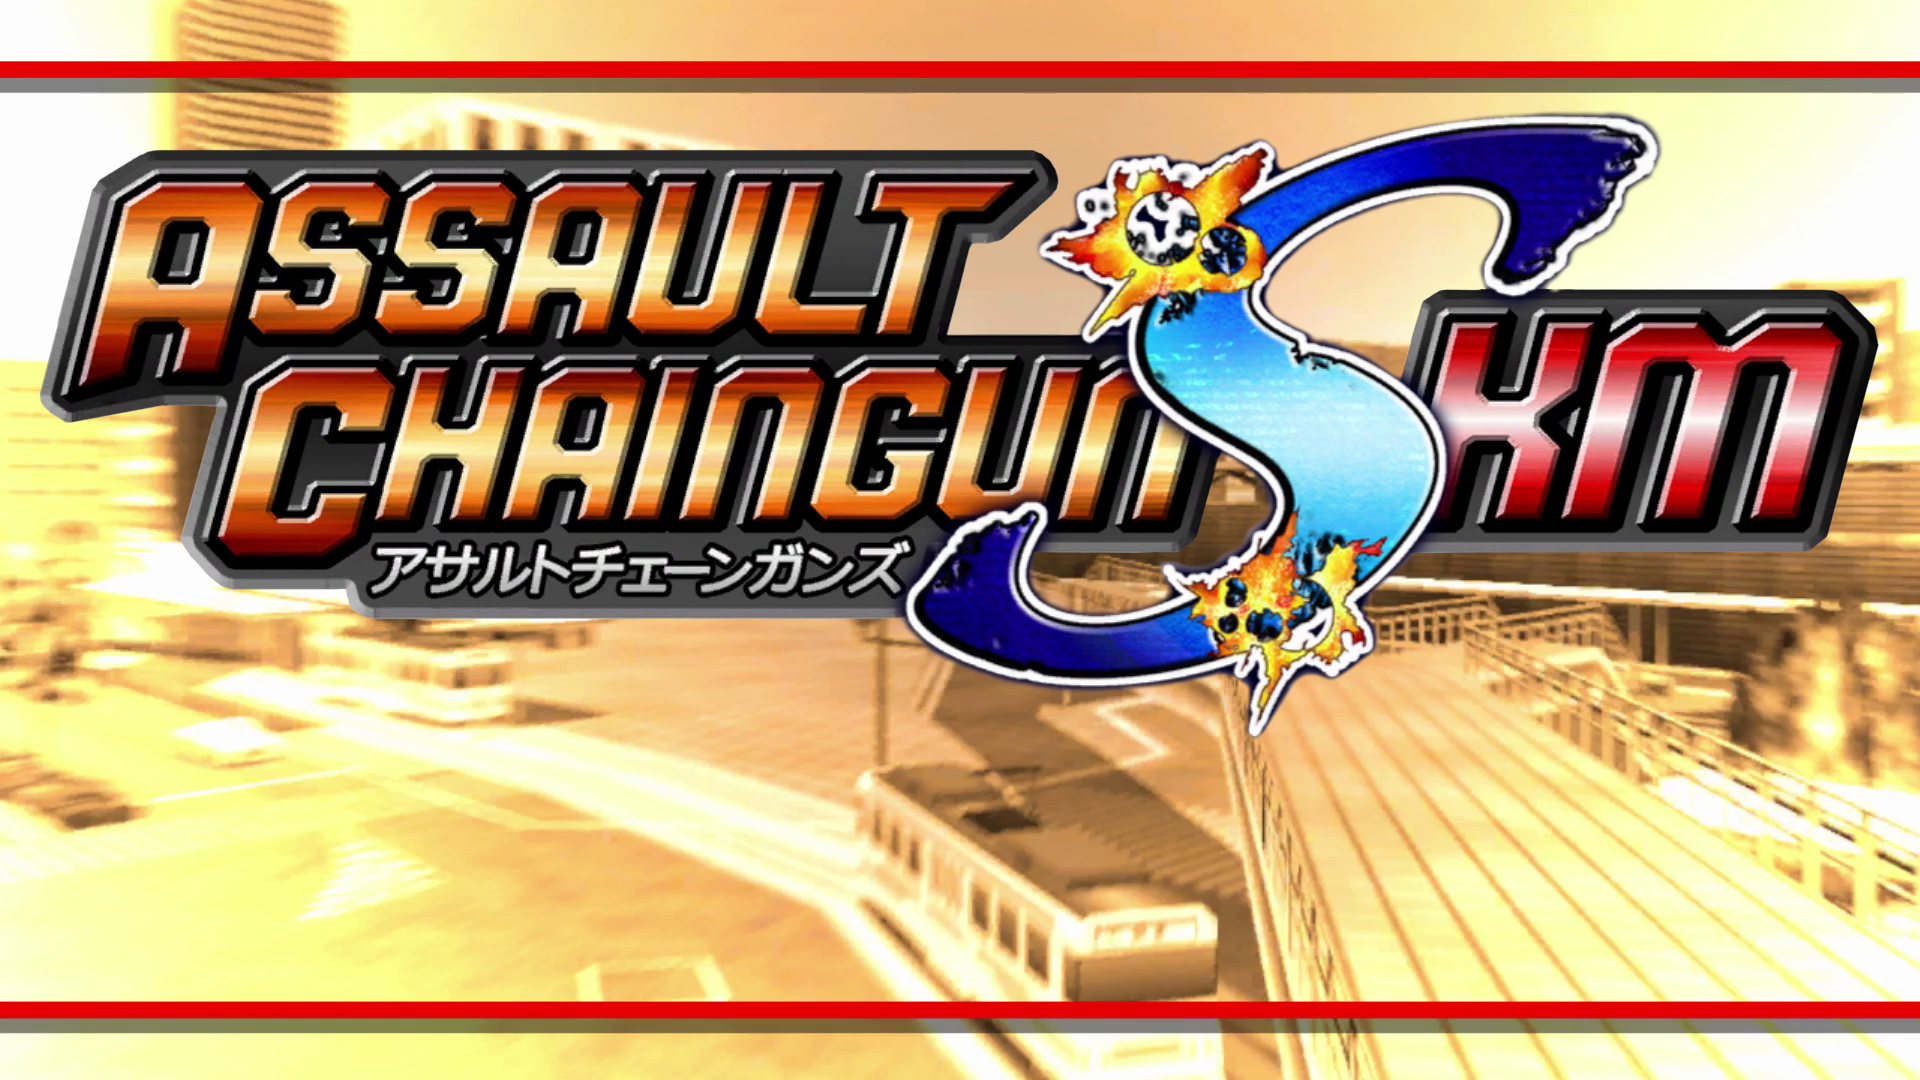 The retro shooting arcade-style “Assault ChaingunS KM” is available now on Nintendo Switch!